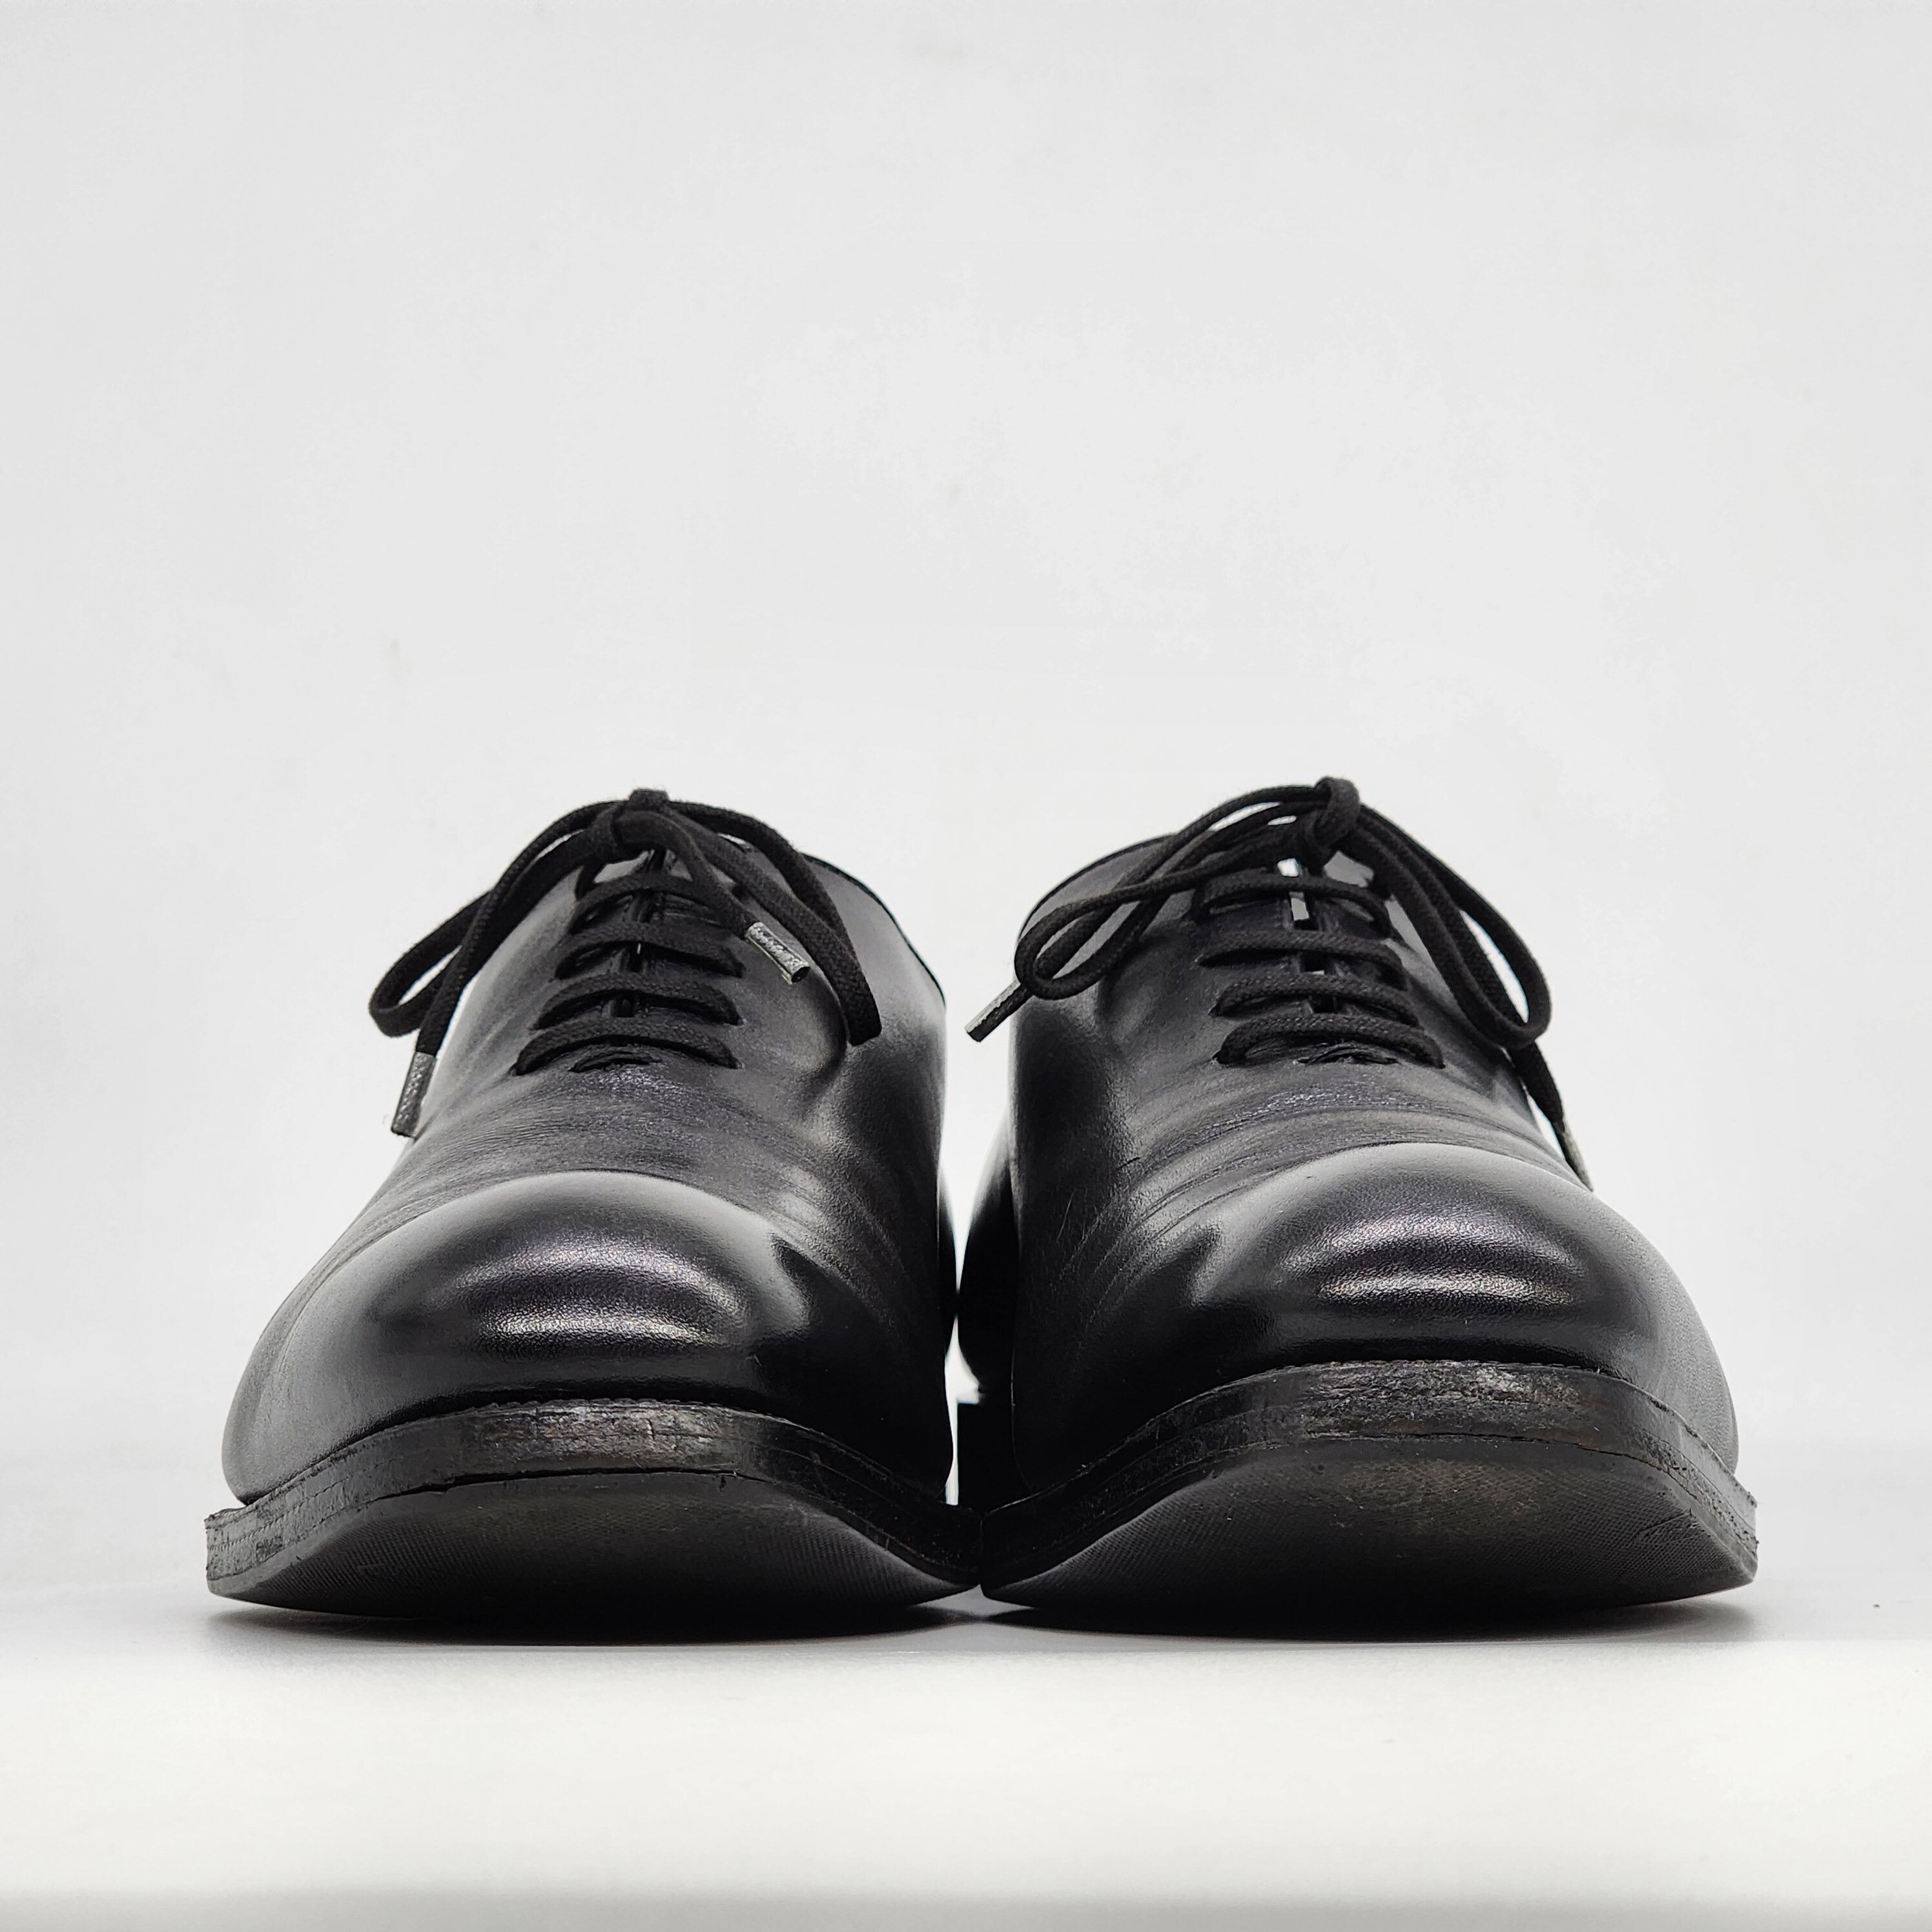 Tom Ford - Elkan Black Leather Whole-cut Oxford Shoes - 2